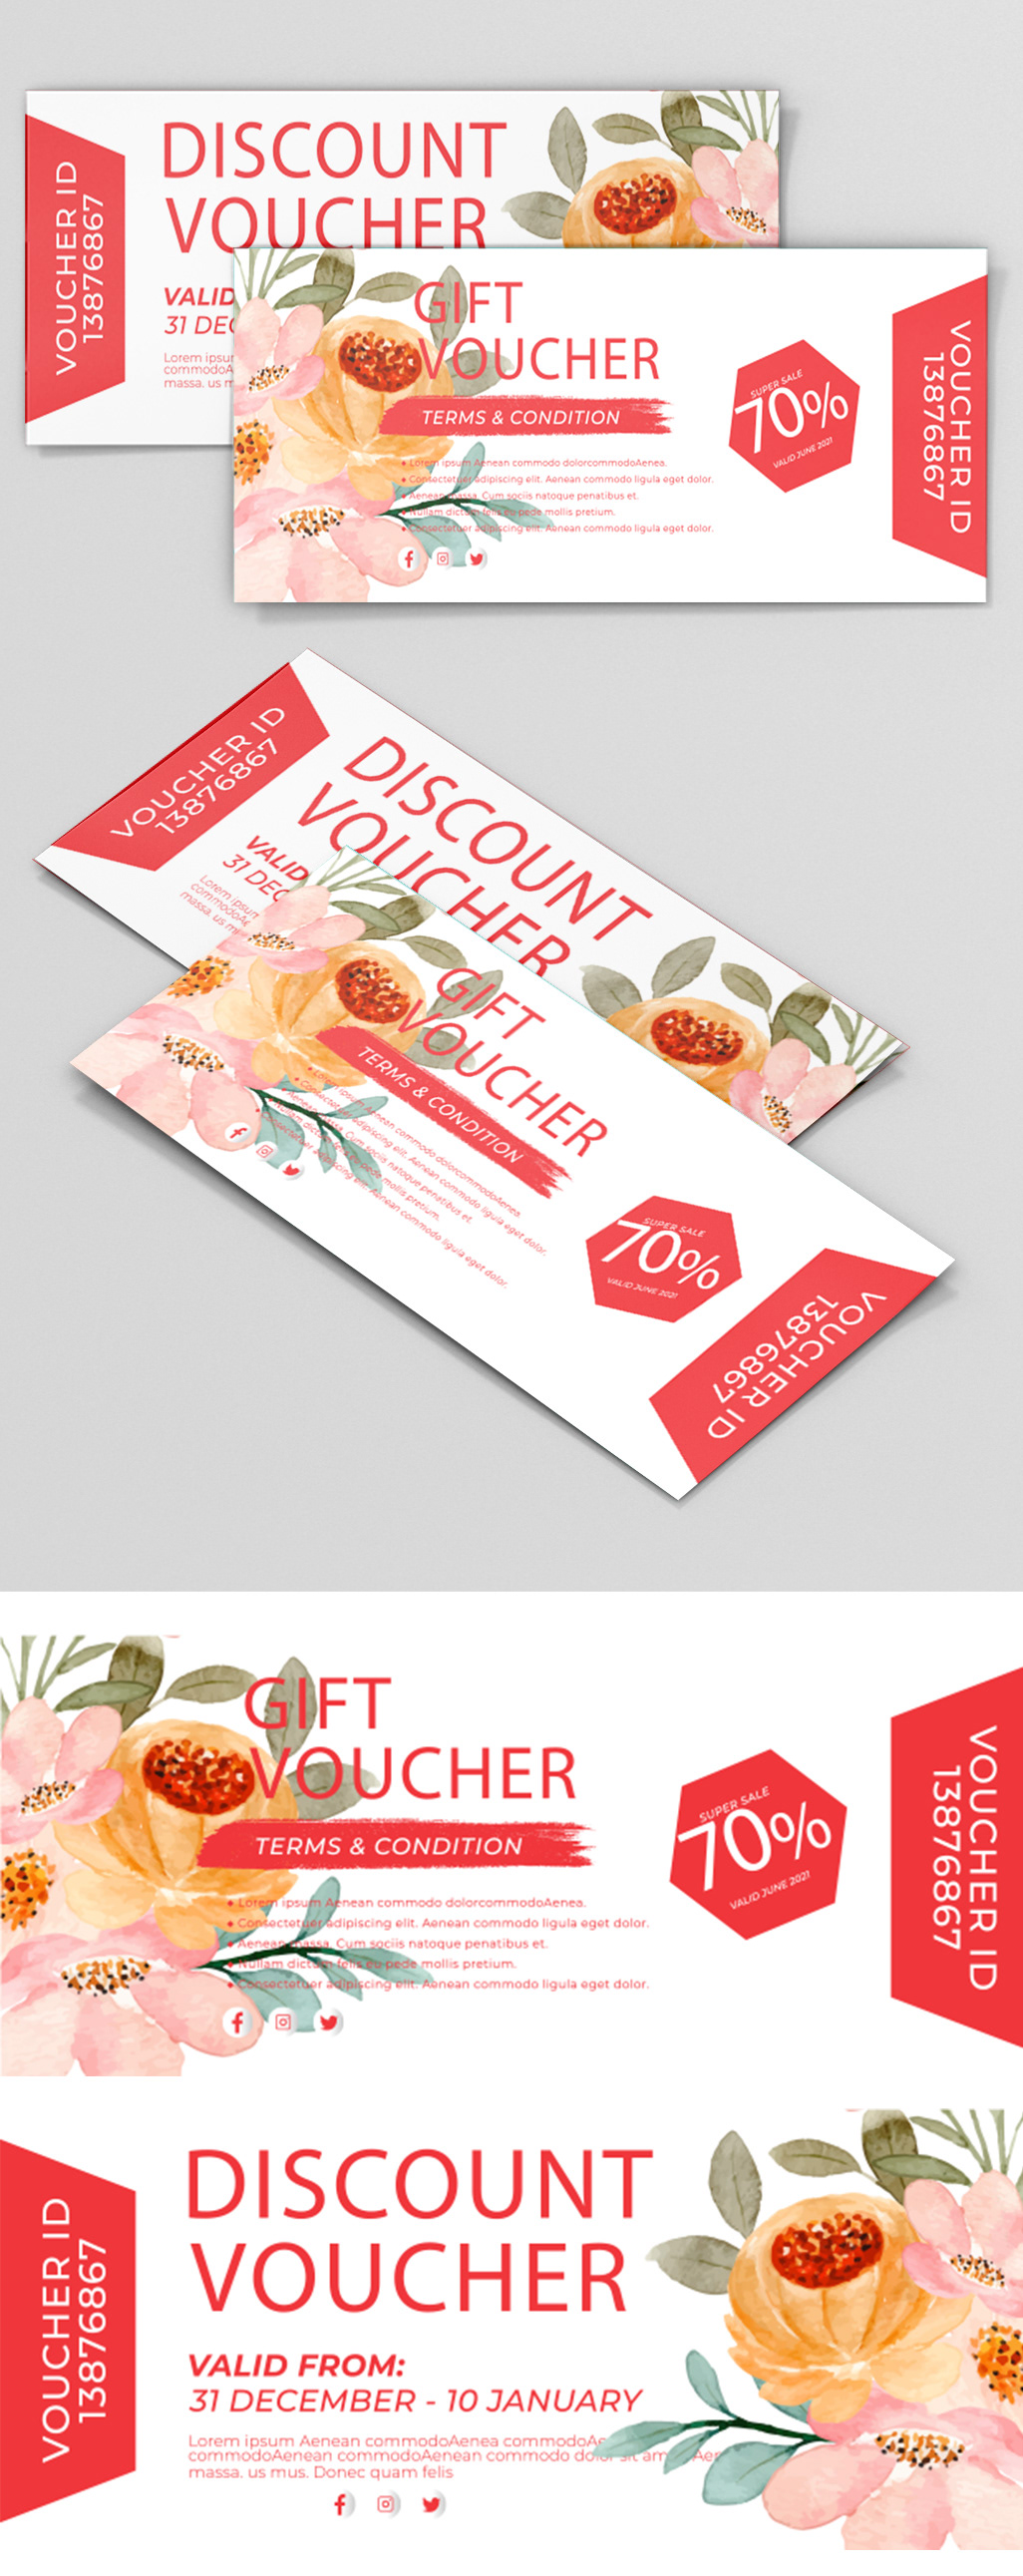 banner design business COUPON decoration floral card vector gift gift card Invitation promo voucher